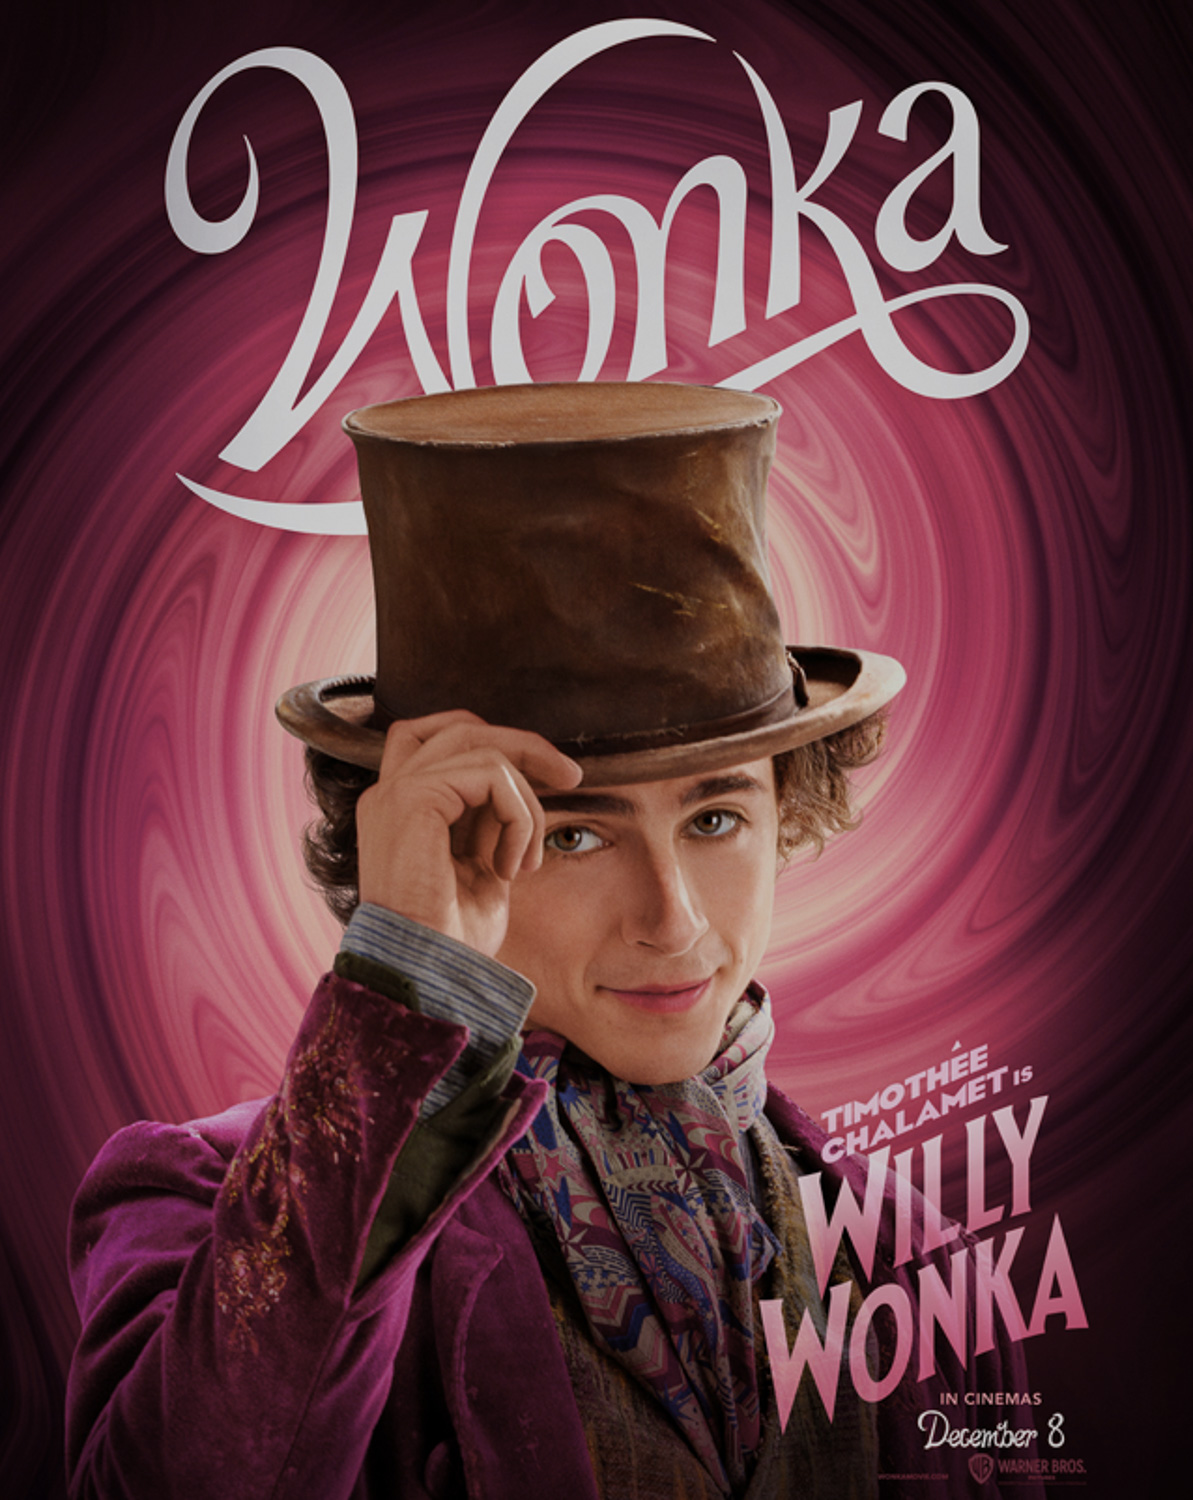 A dark-haired young man in a top hat and suit coat in front of a maroon swirling background with the word Wonka predominantly displayed